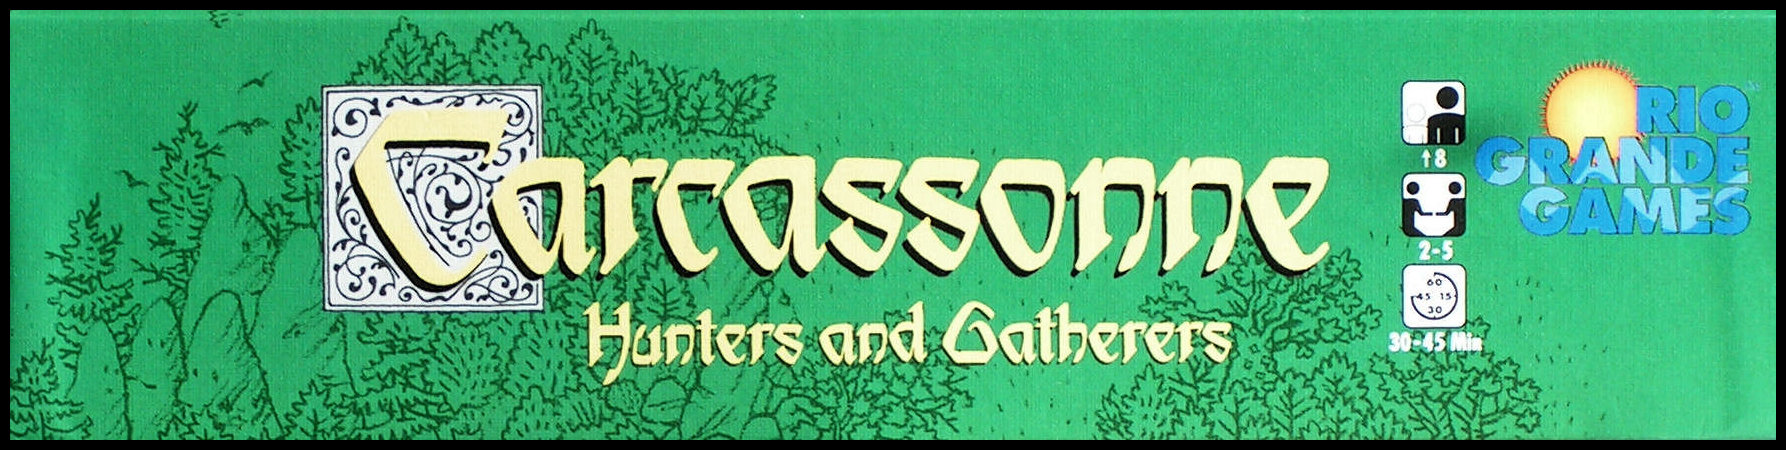 Carcassonne: Hunters And Gatherers - Box Side